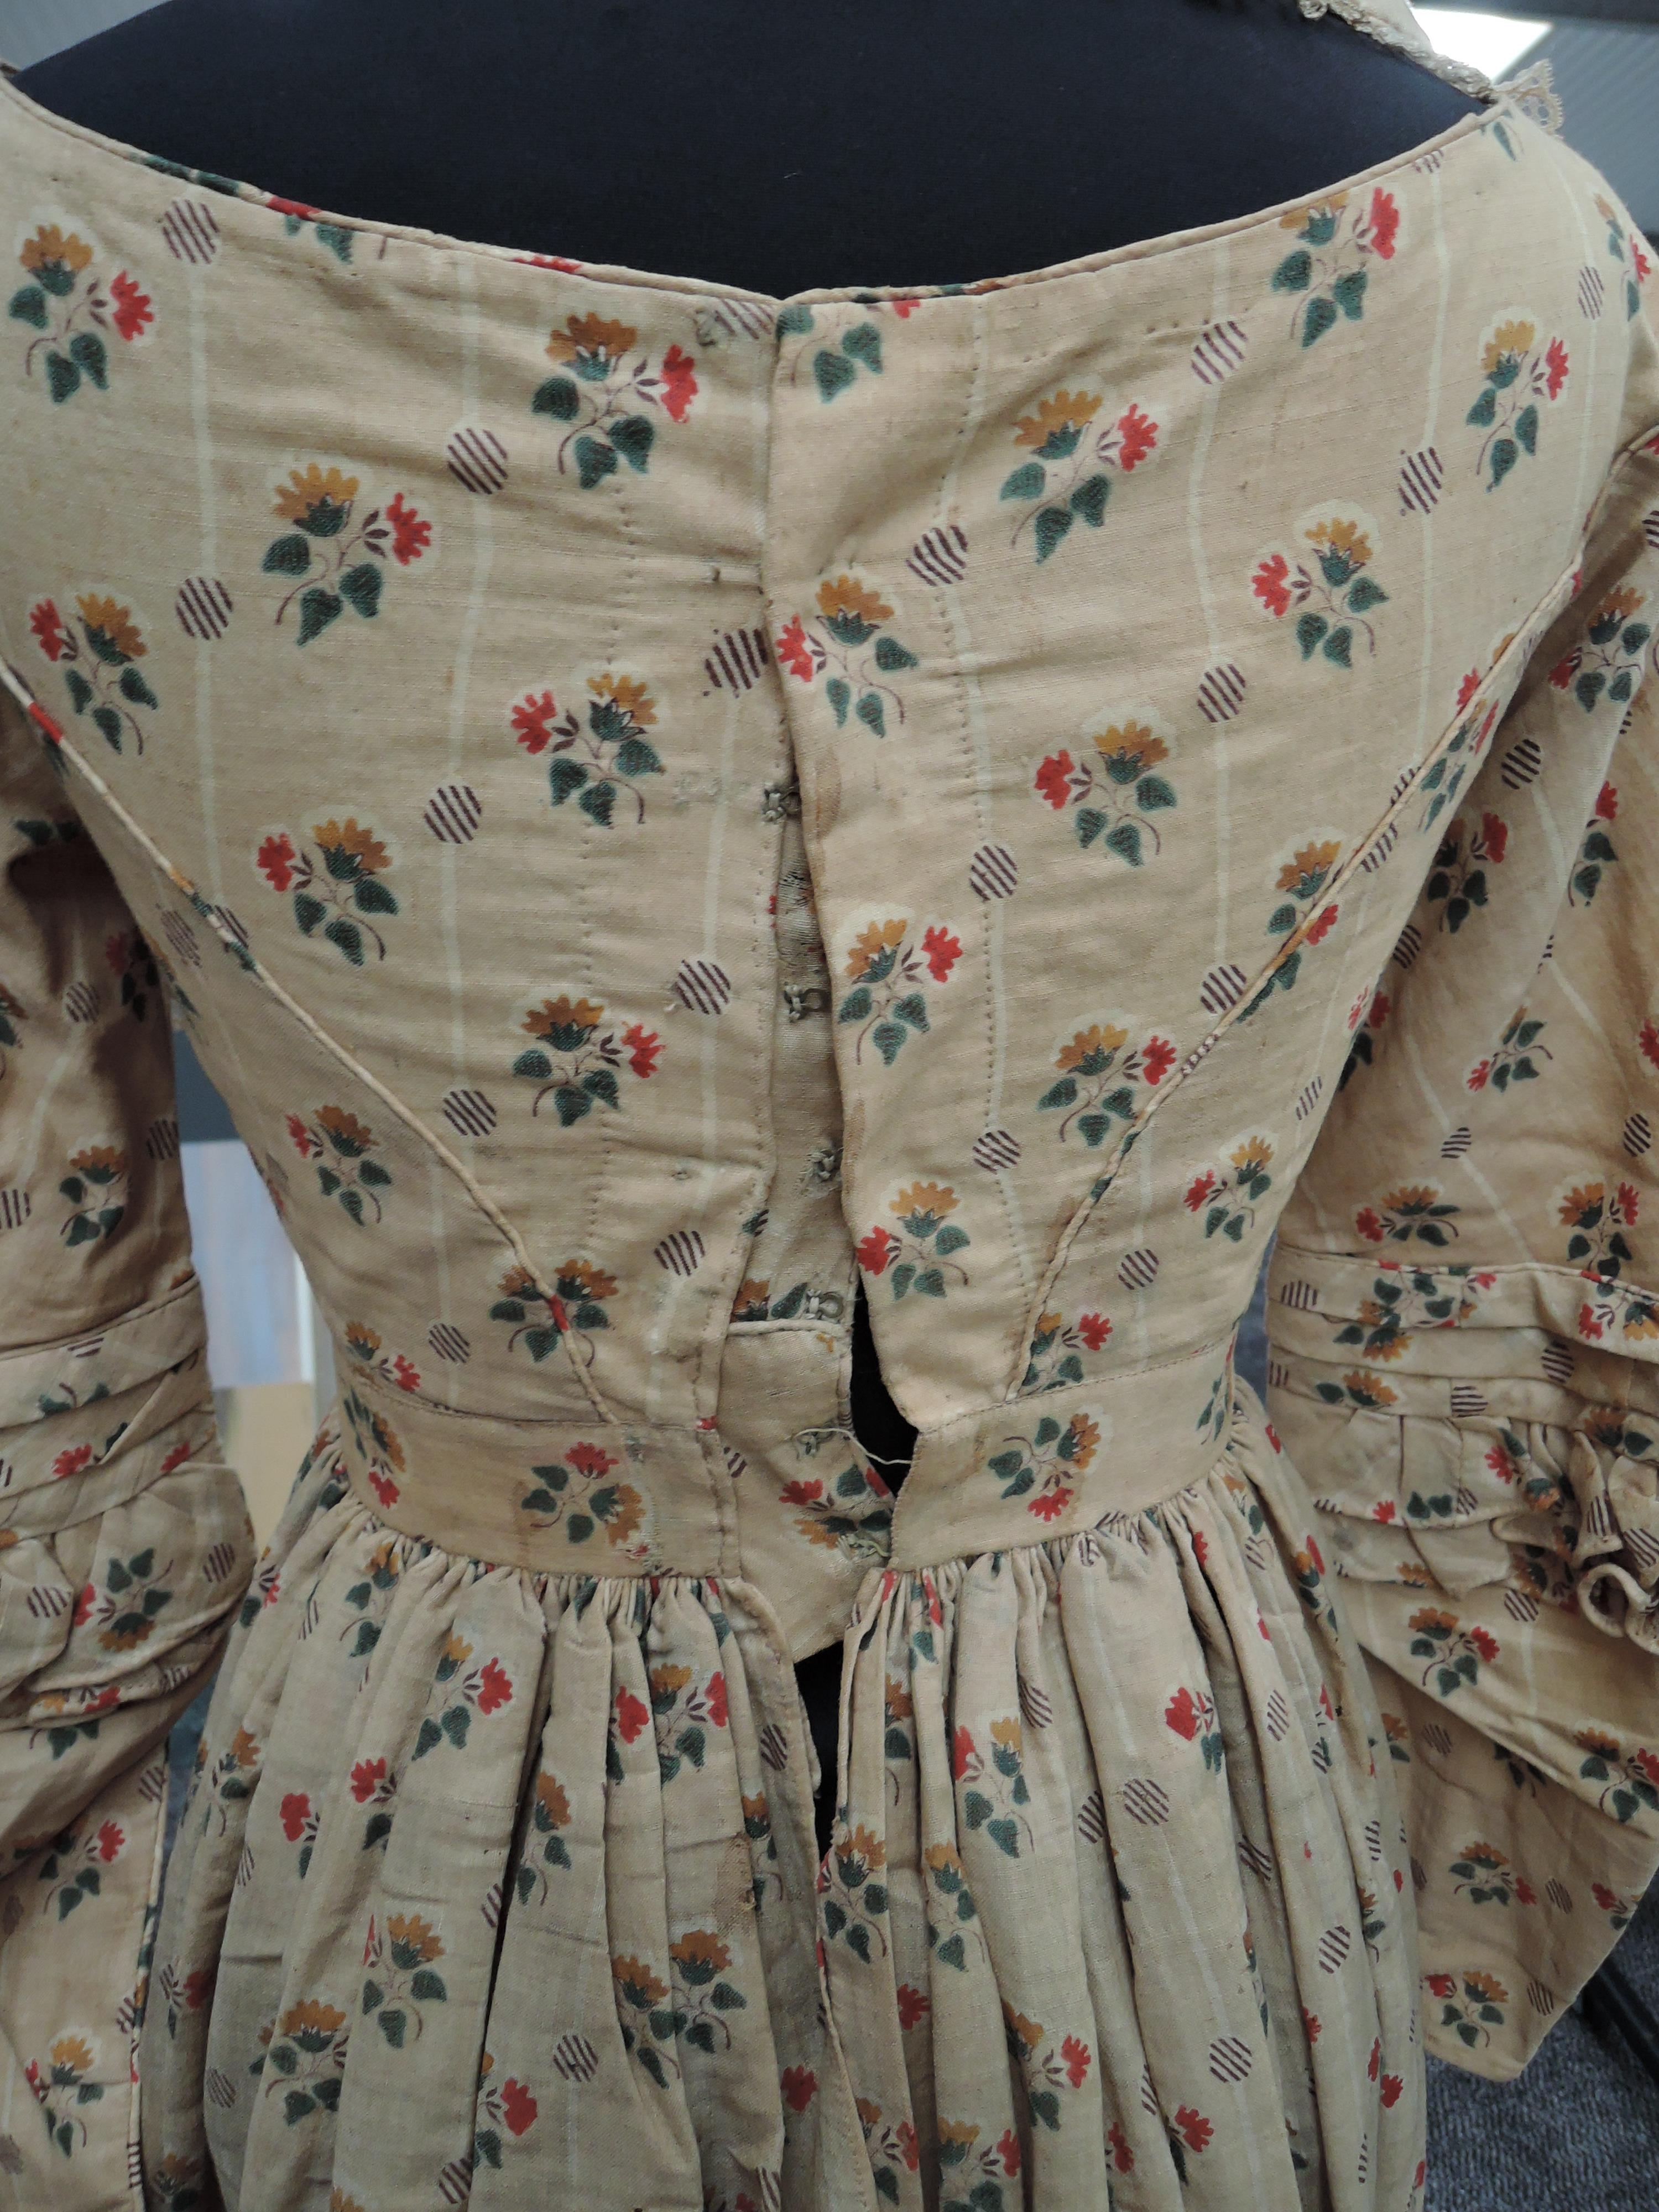 A Victorian cotton dress and lace edged cape having floral print on beige ground, superb details - Image 3 of 10